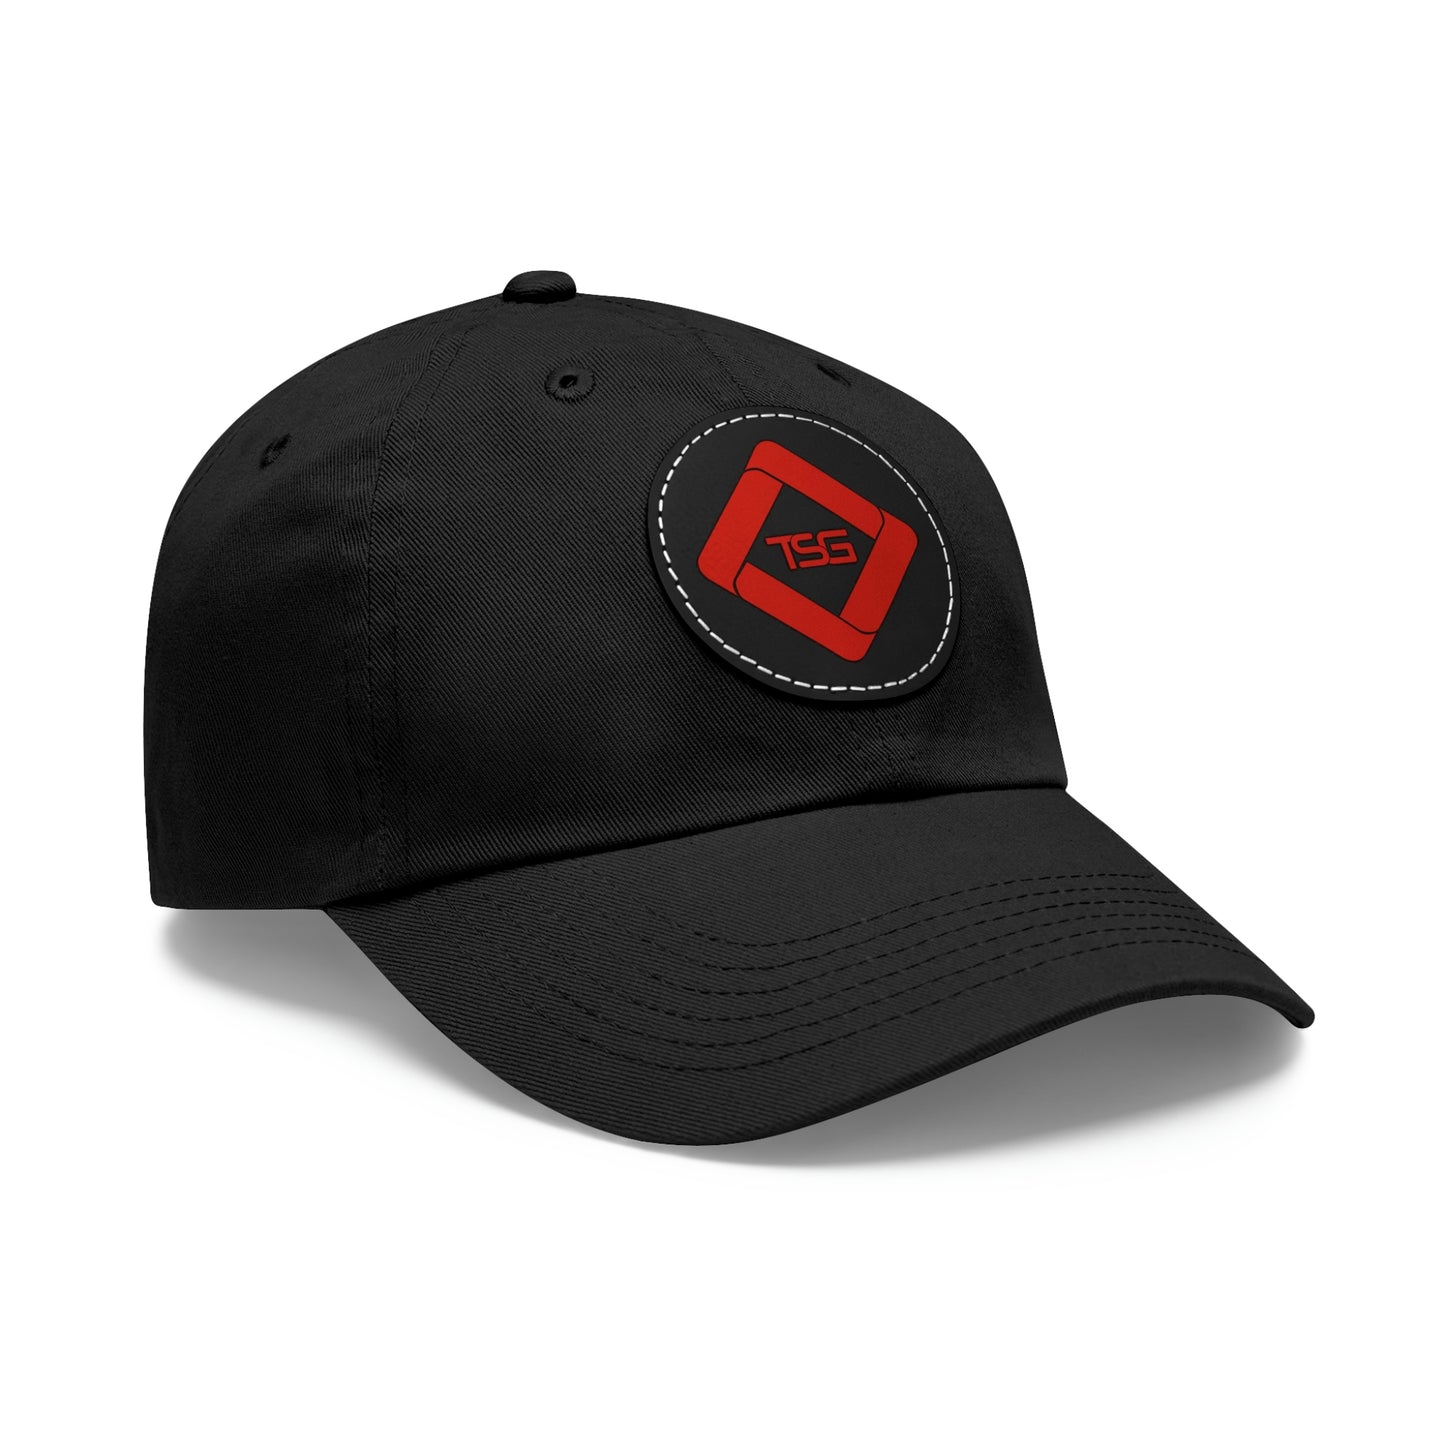 TSG - Dad Hat with Leather Patch (Round)